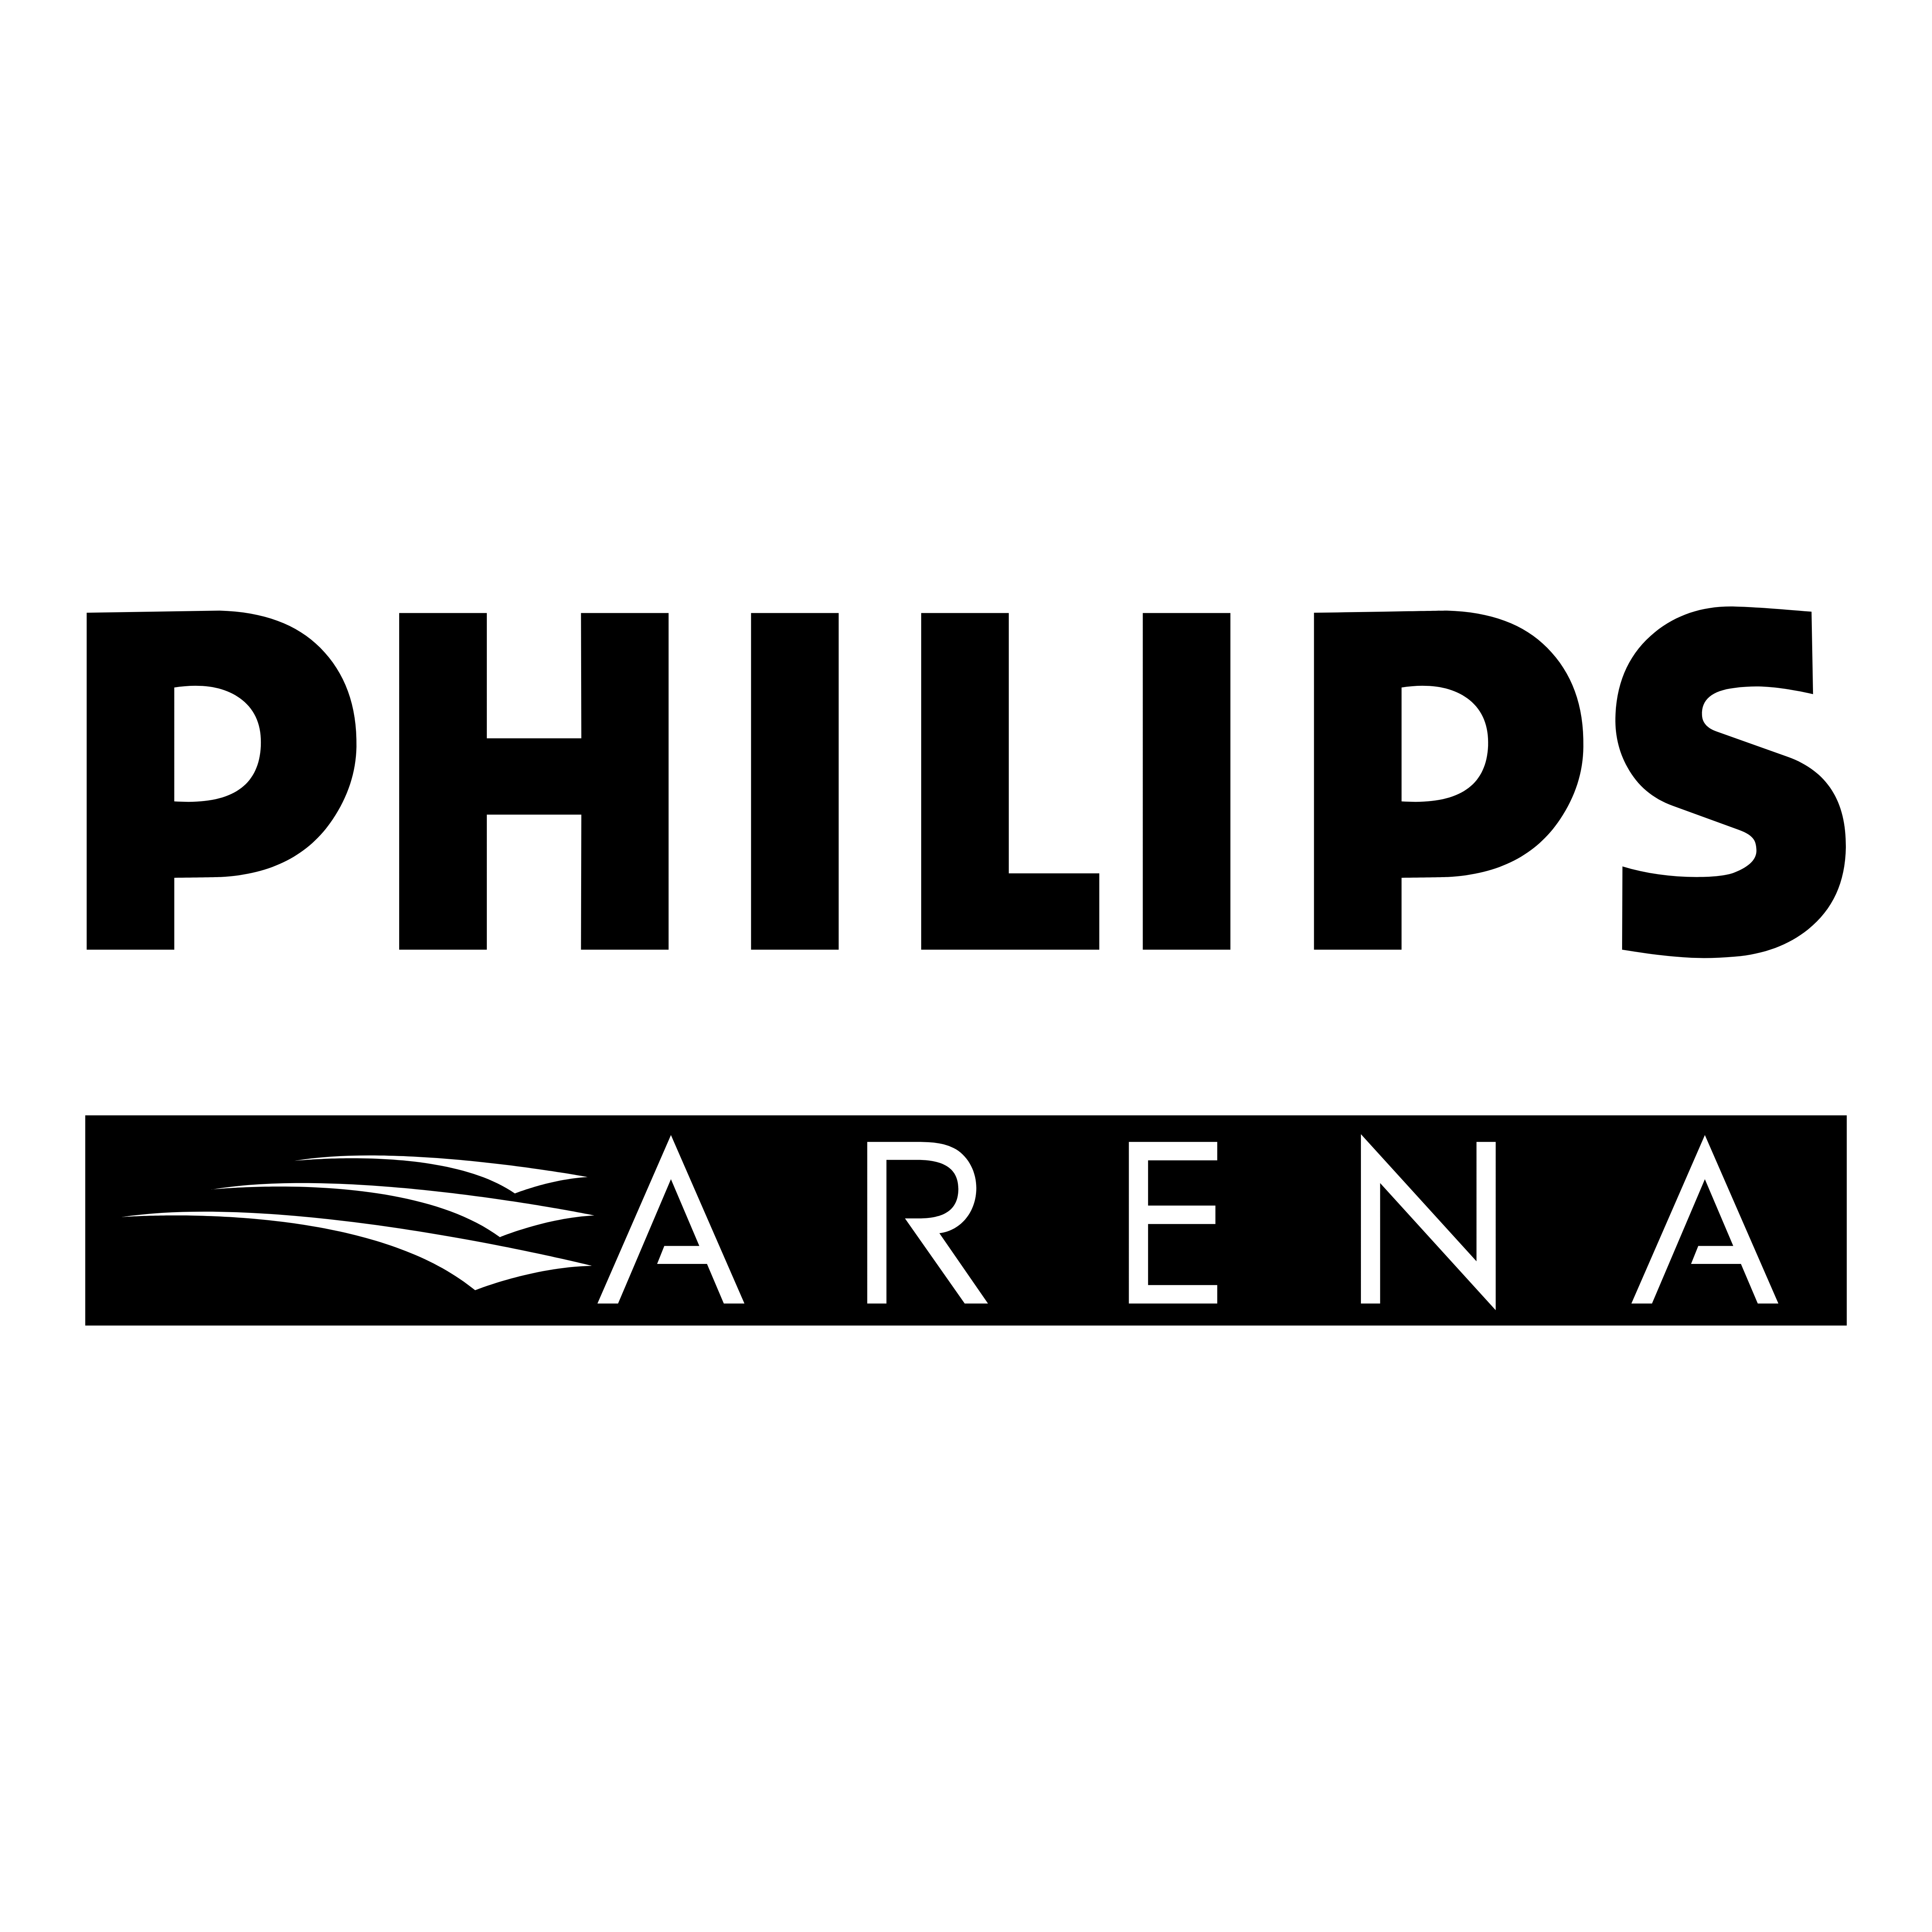 Philips – Logos Download, Philips Logo PNG - Free PNG